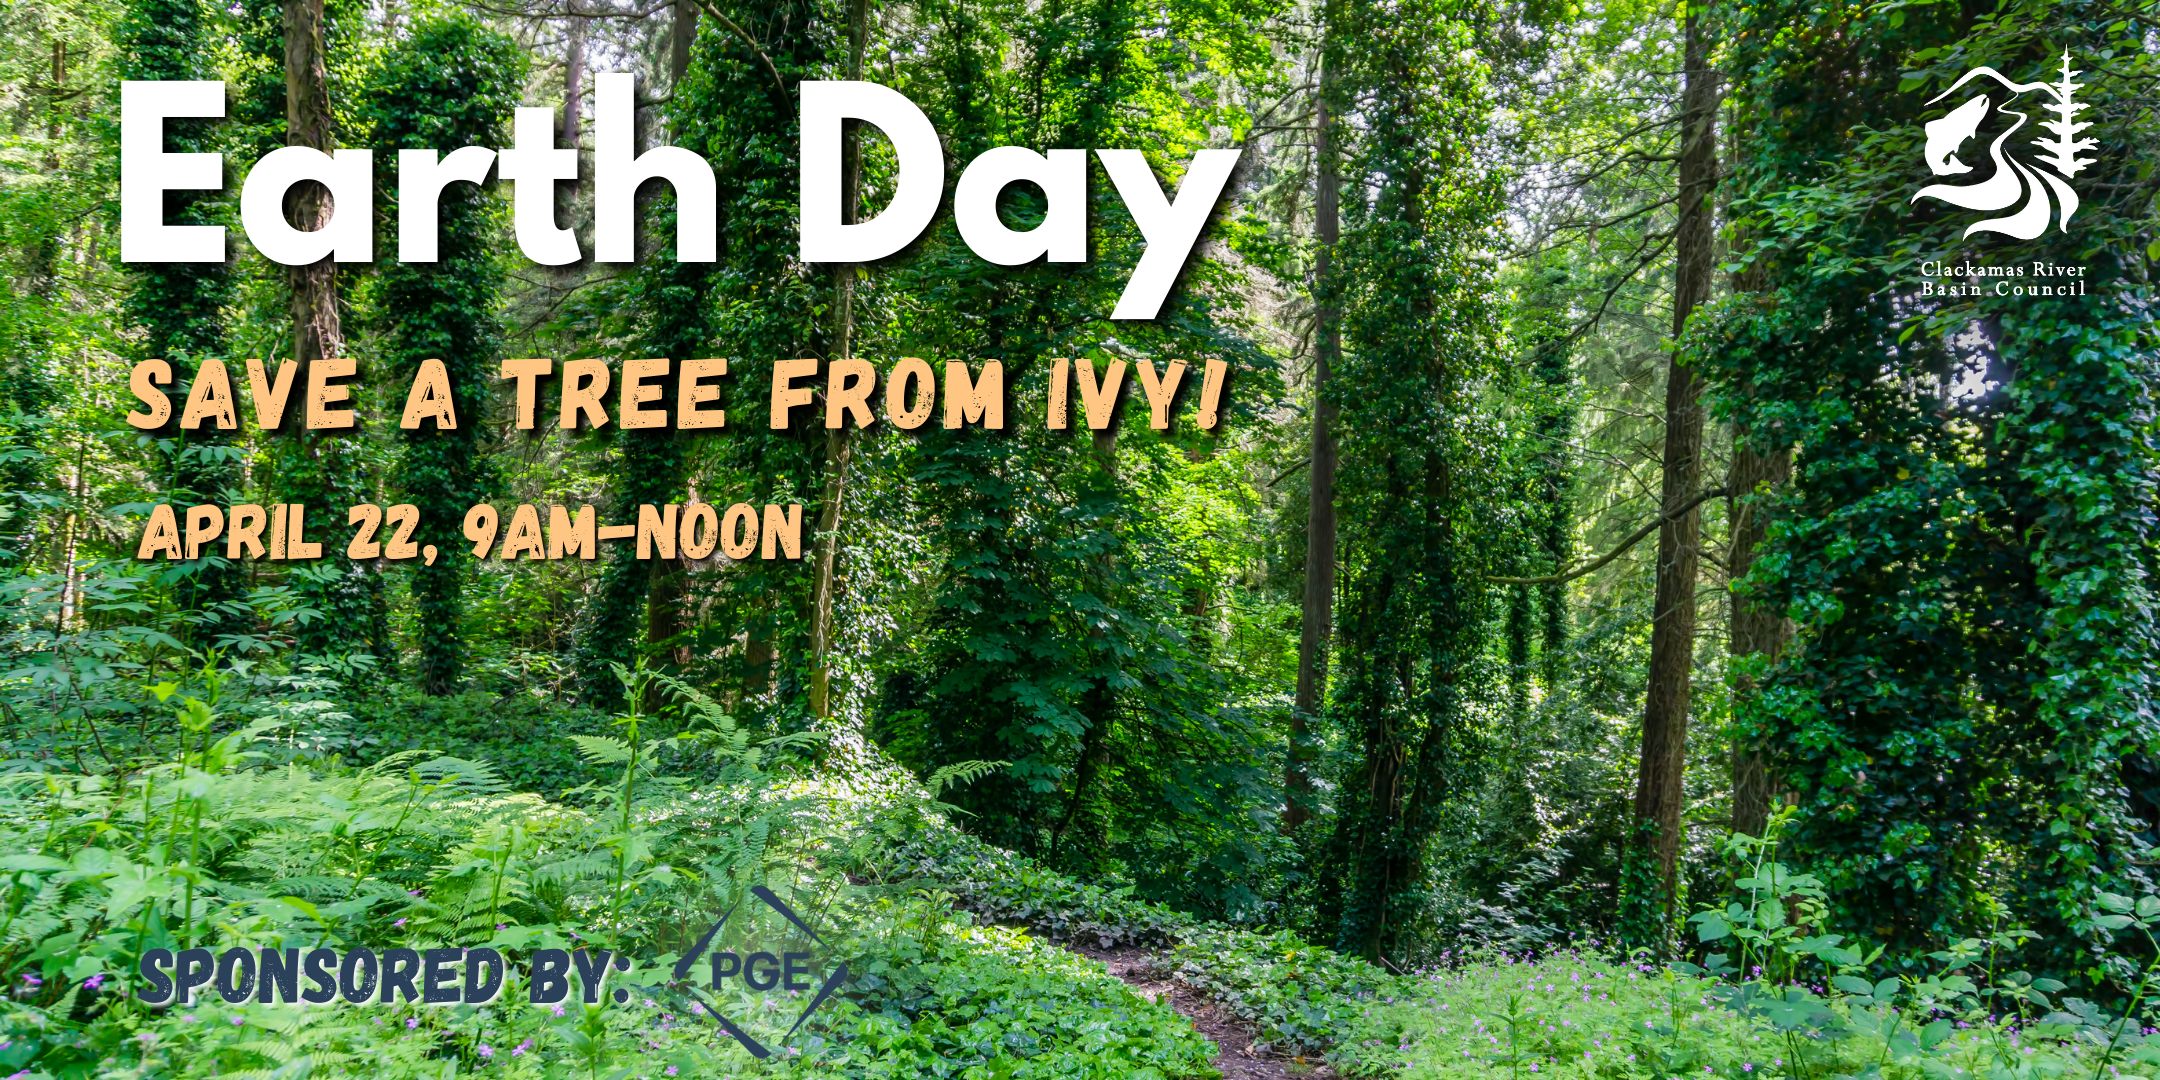 Earth Day: Save a Tree from Ivy!